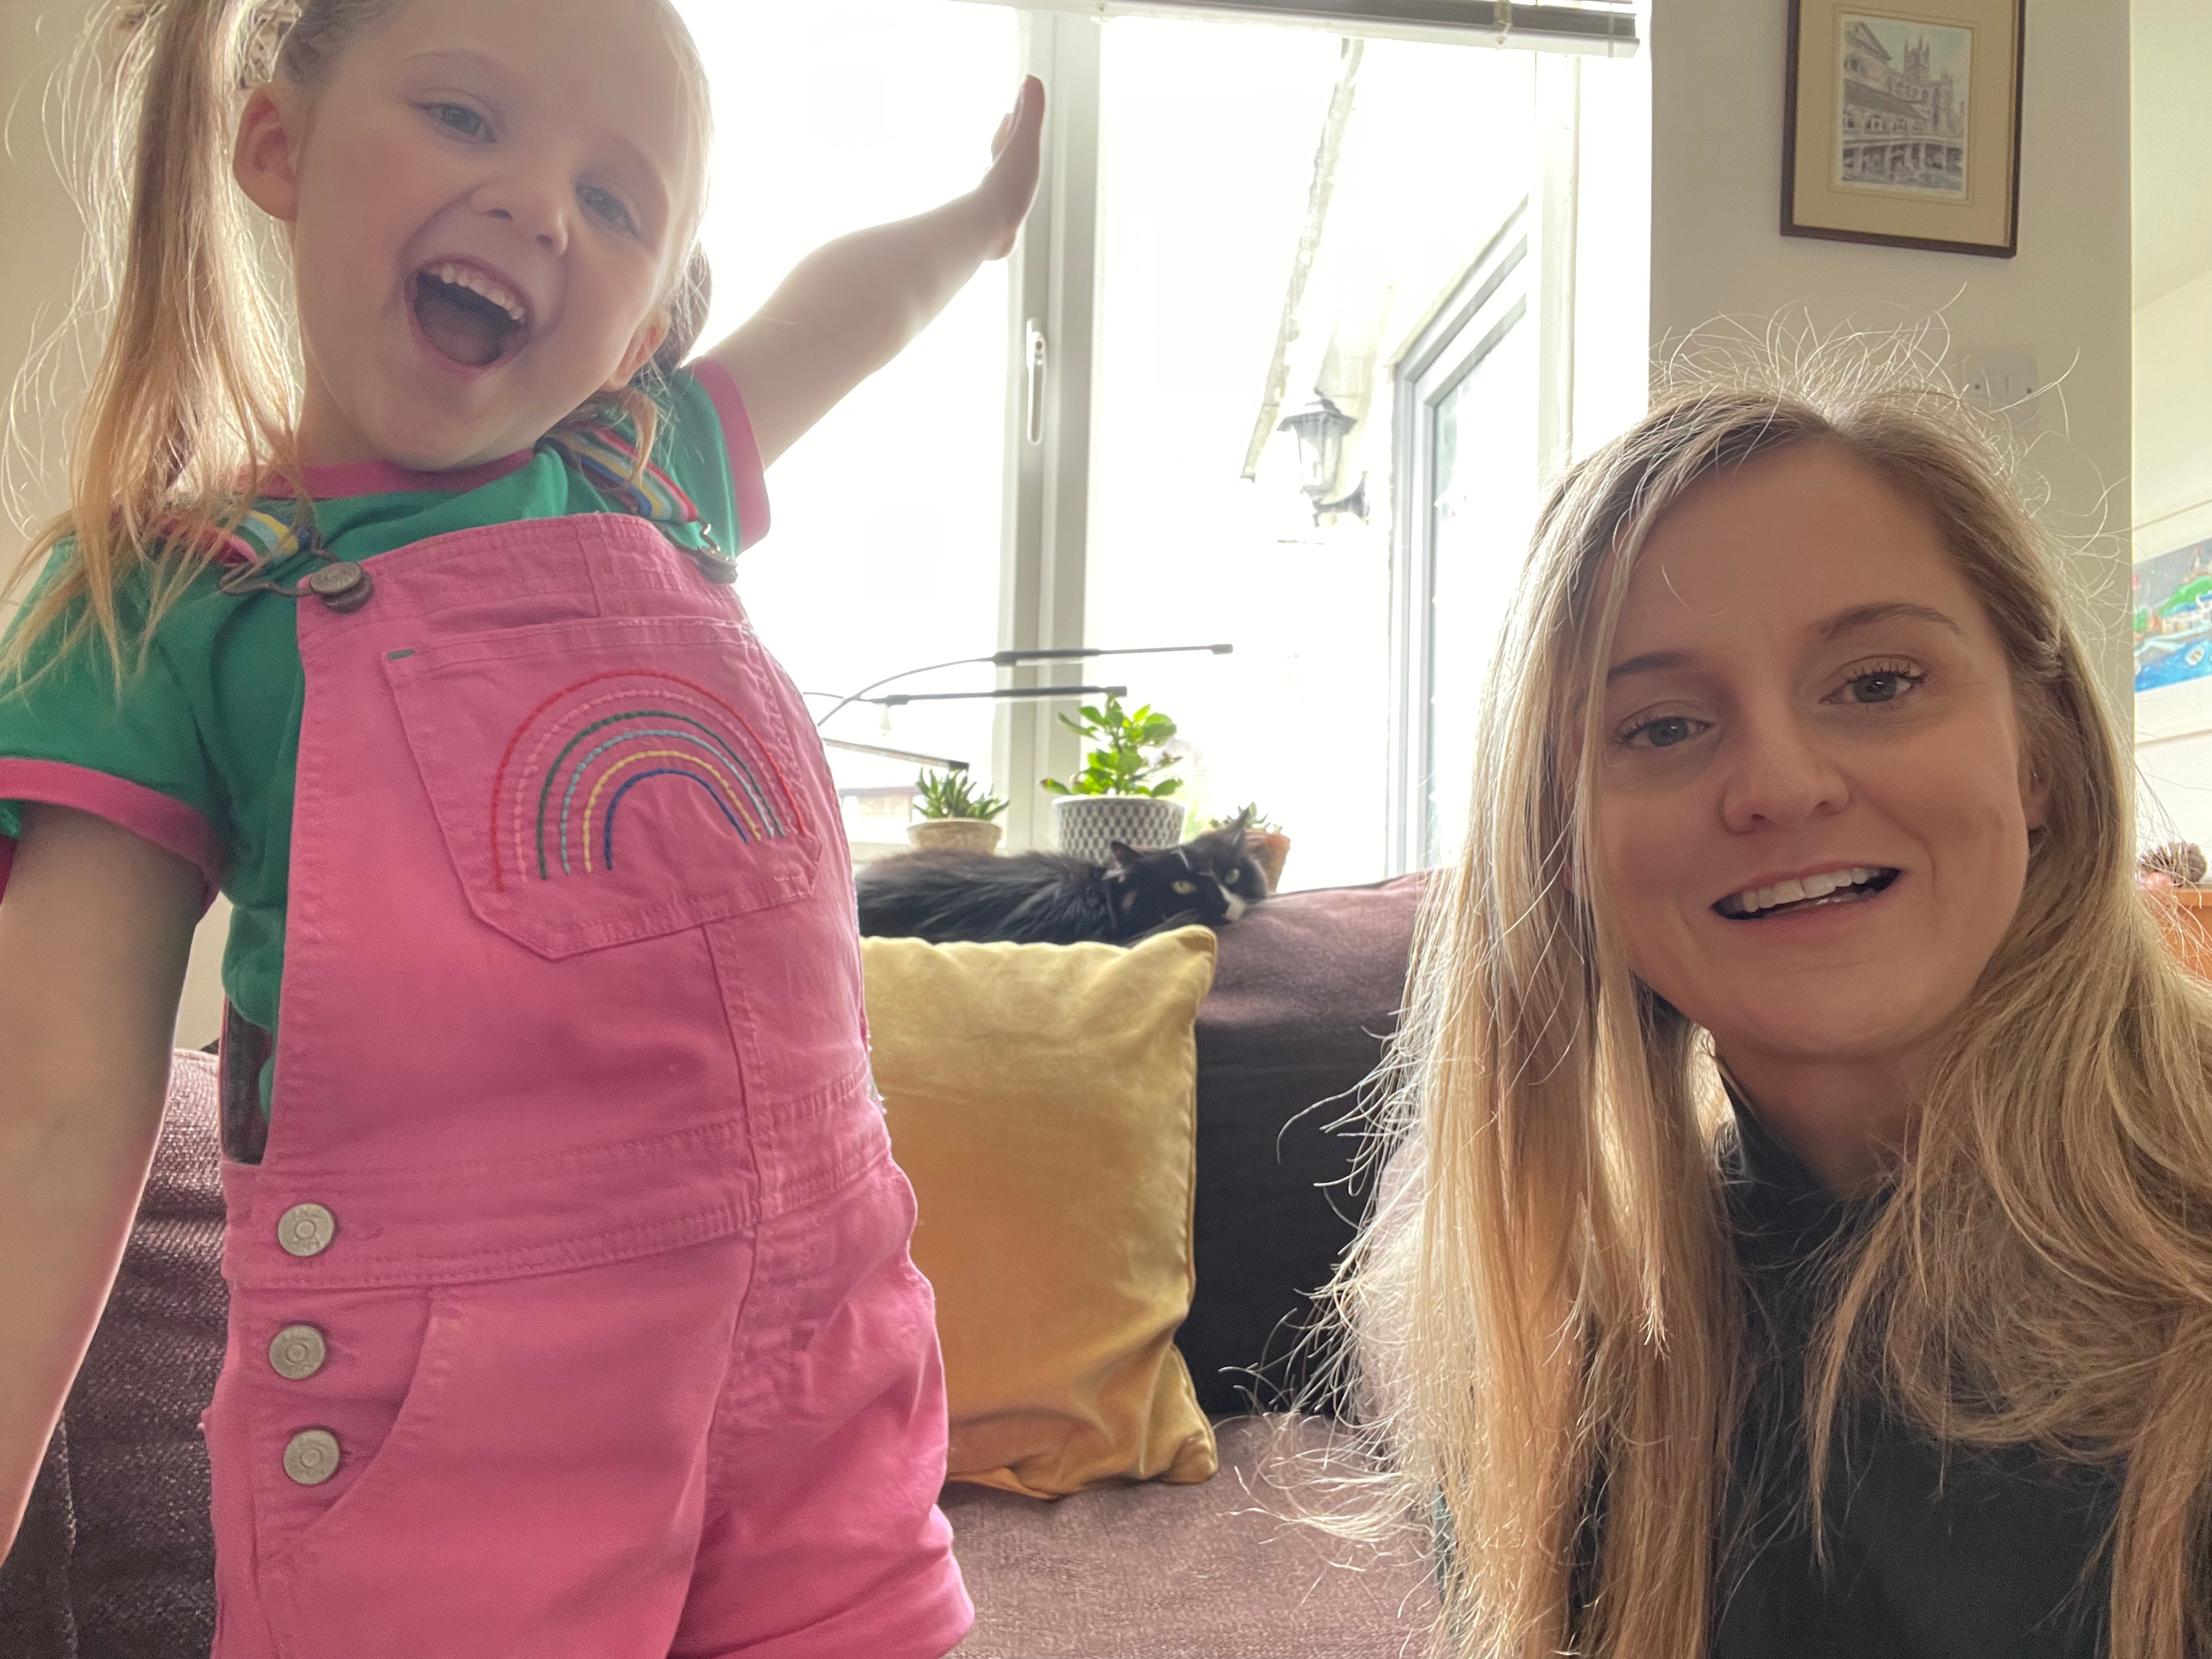 Rebecca is grateful to be cancer-free and mum to her beautiful daughter